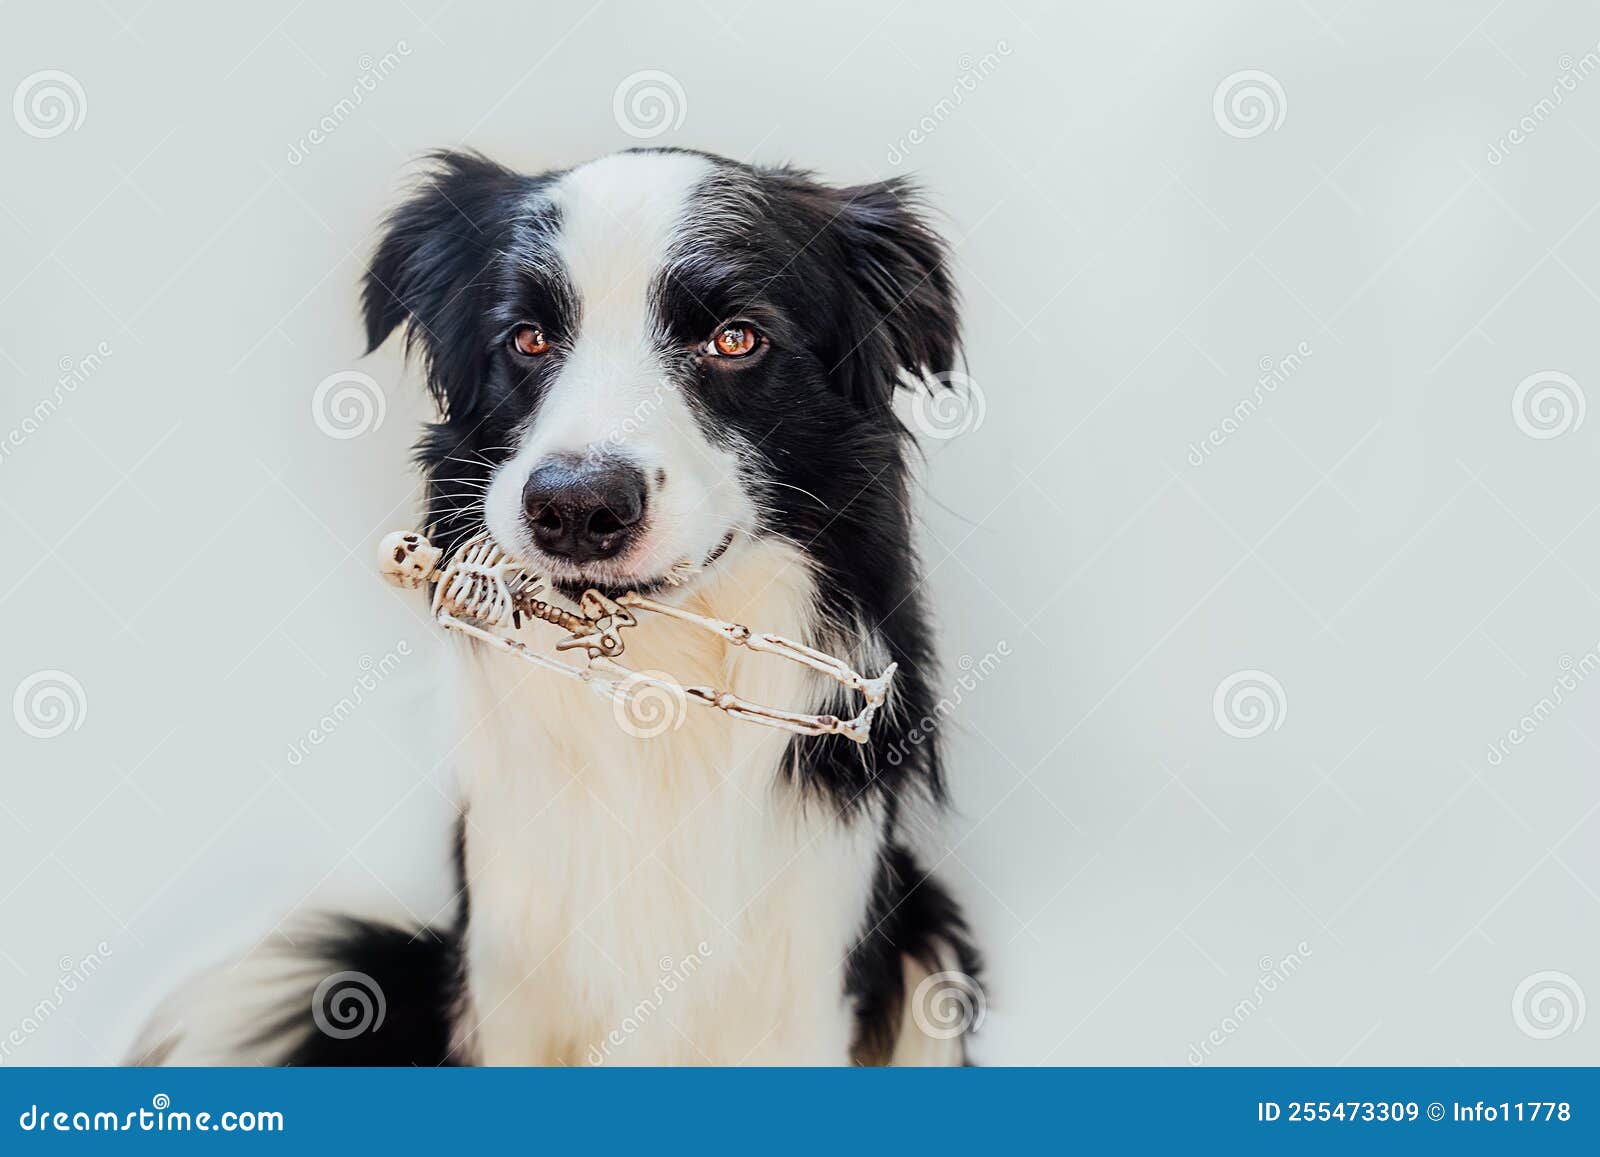 Trick or Treat concept. Funny puppy dog border collie dressed in